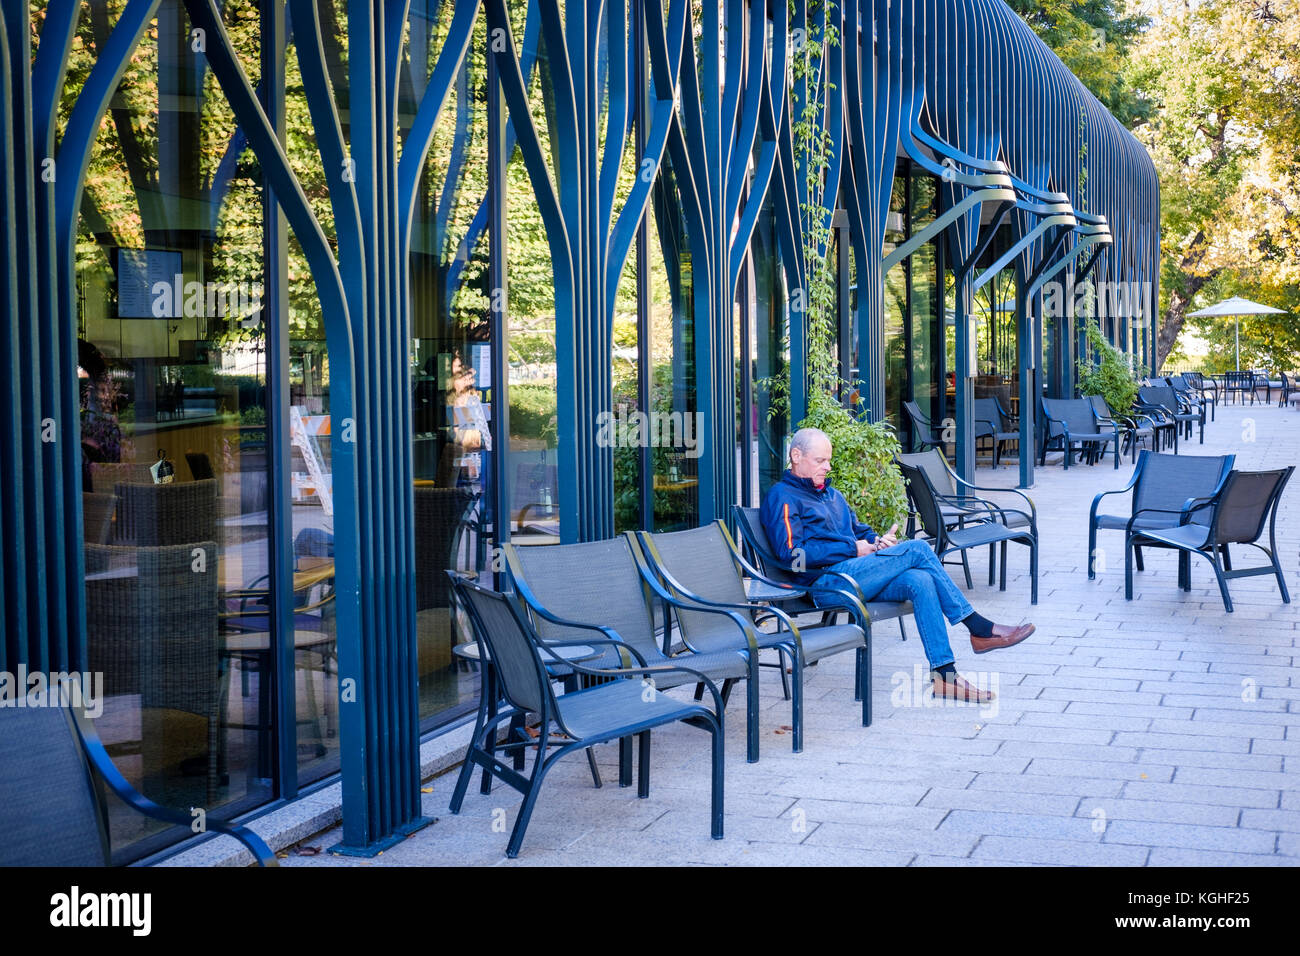 The Pavilion Cafe at the National Gallery of Art Sculpture Garden in Washington DC, United States of America, USA Stock Photo